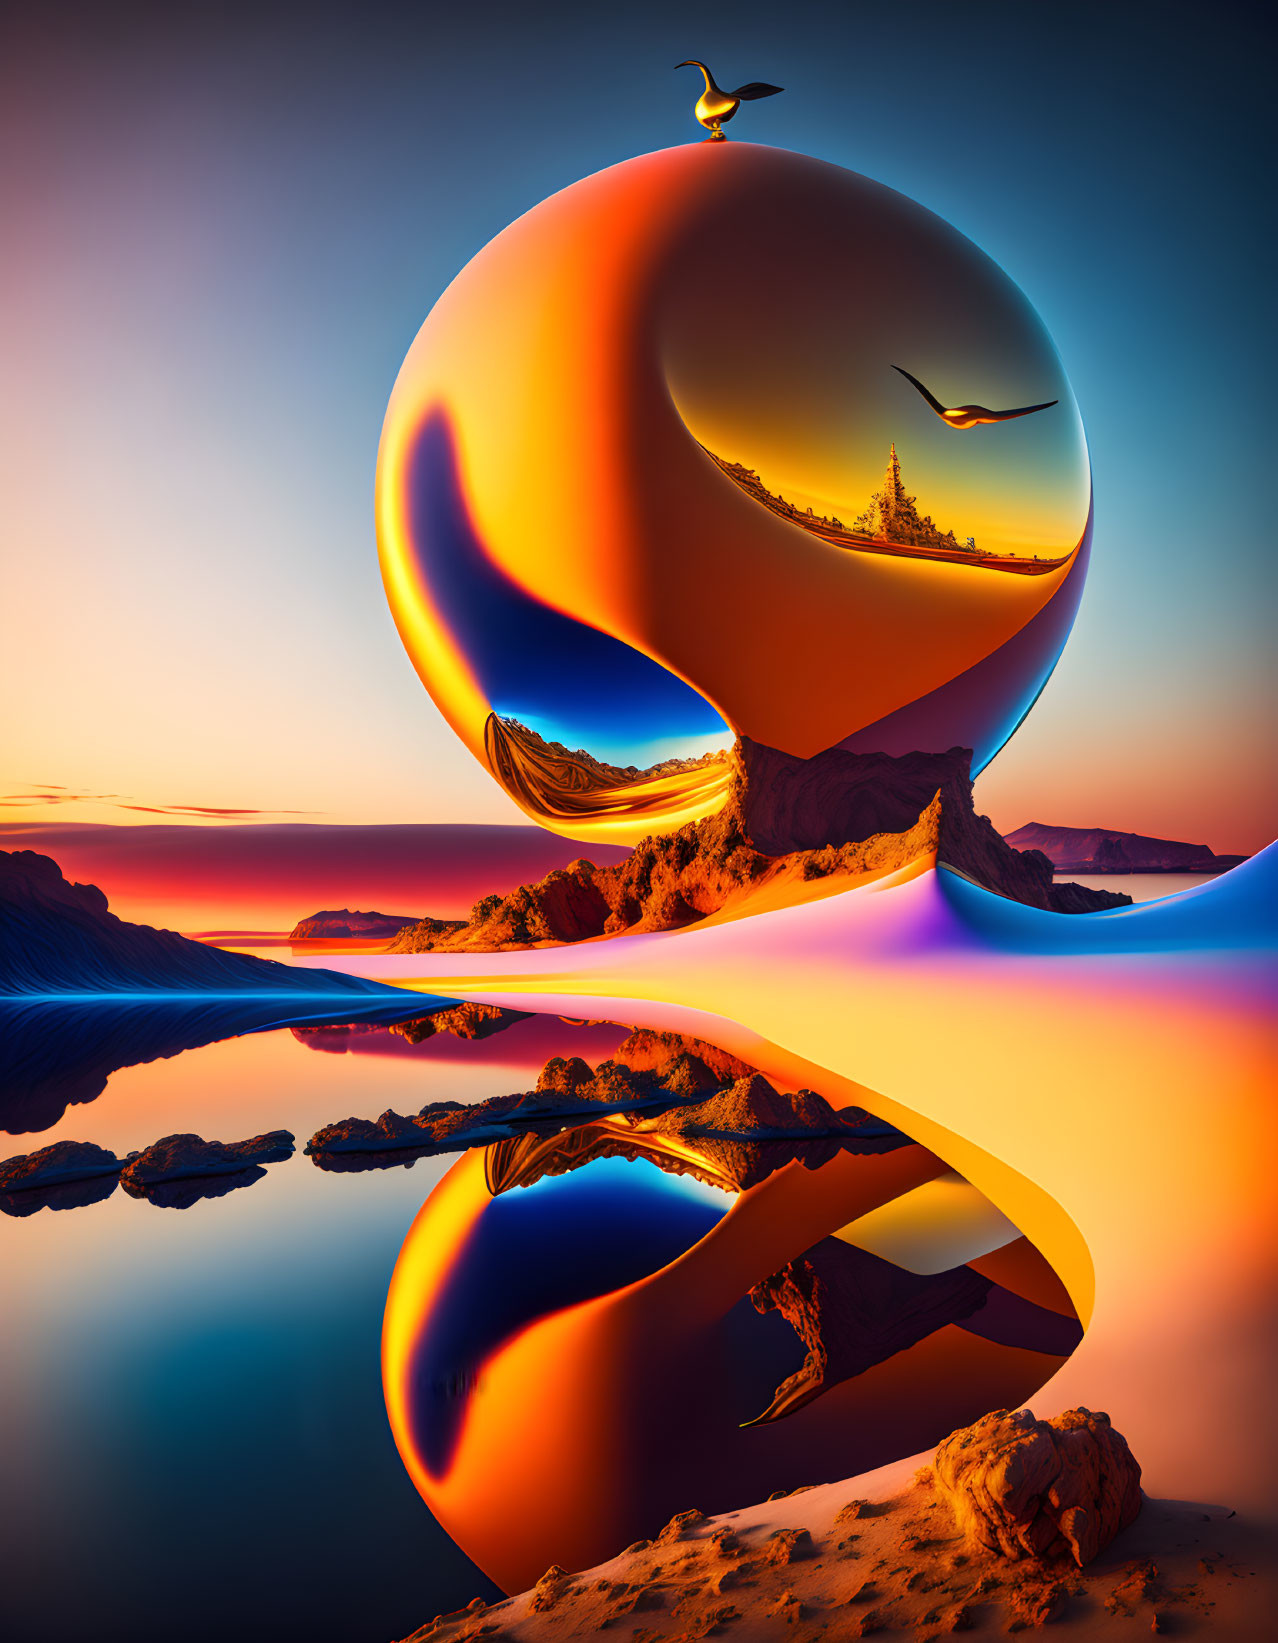 Surreal landscape with reflective spherical object and swirling pattern at sunset